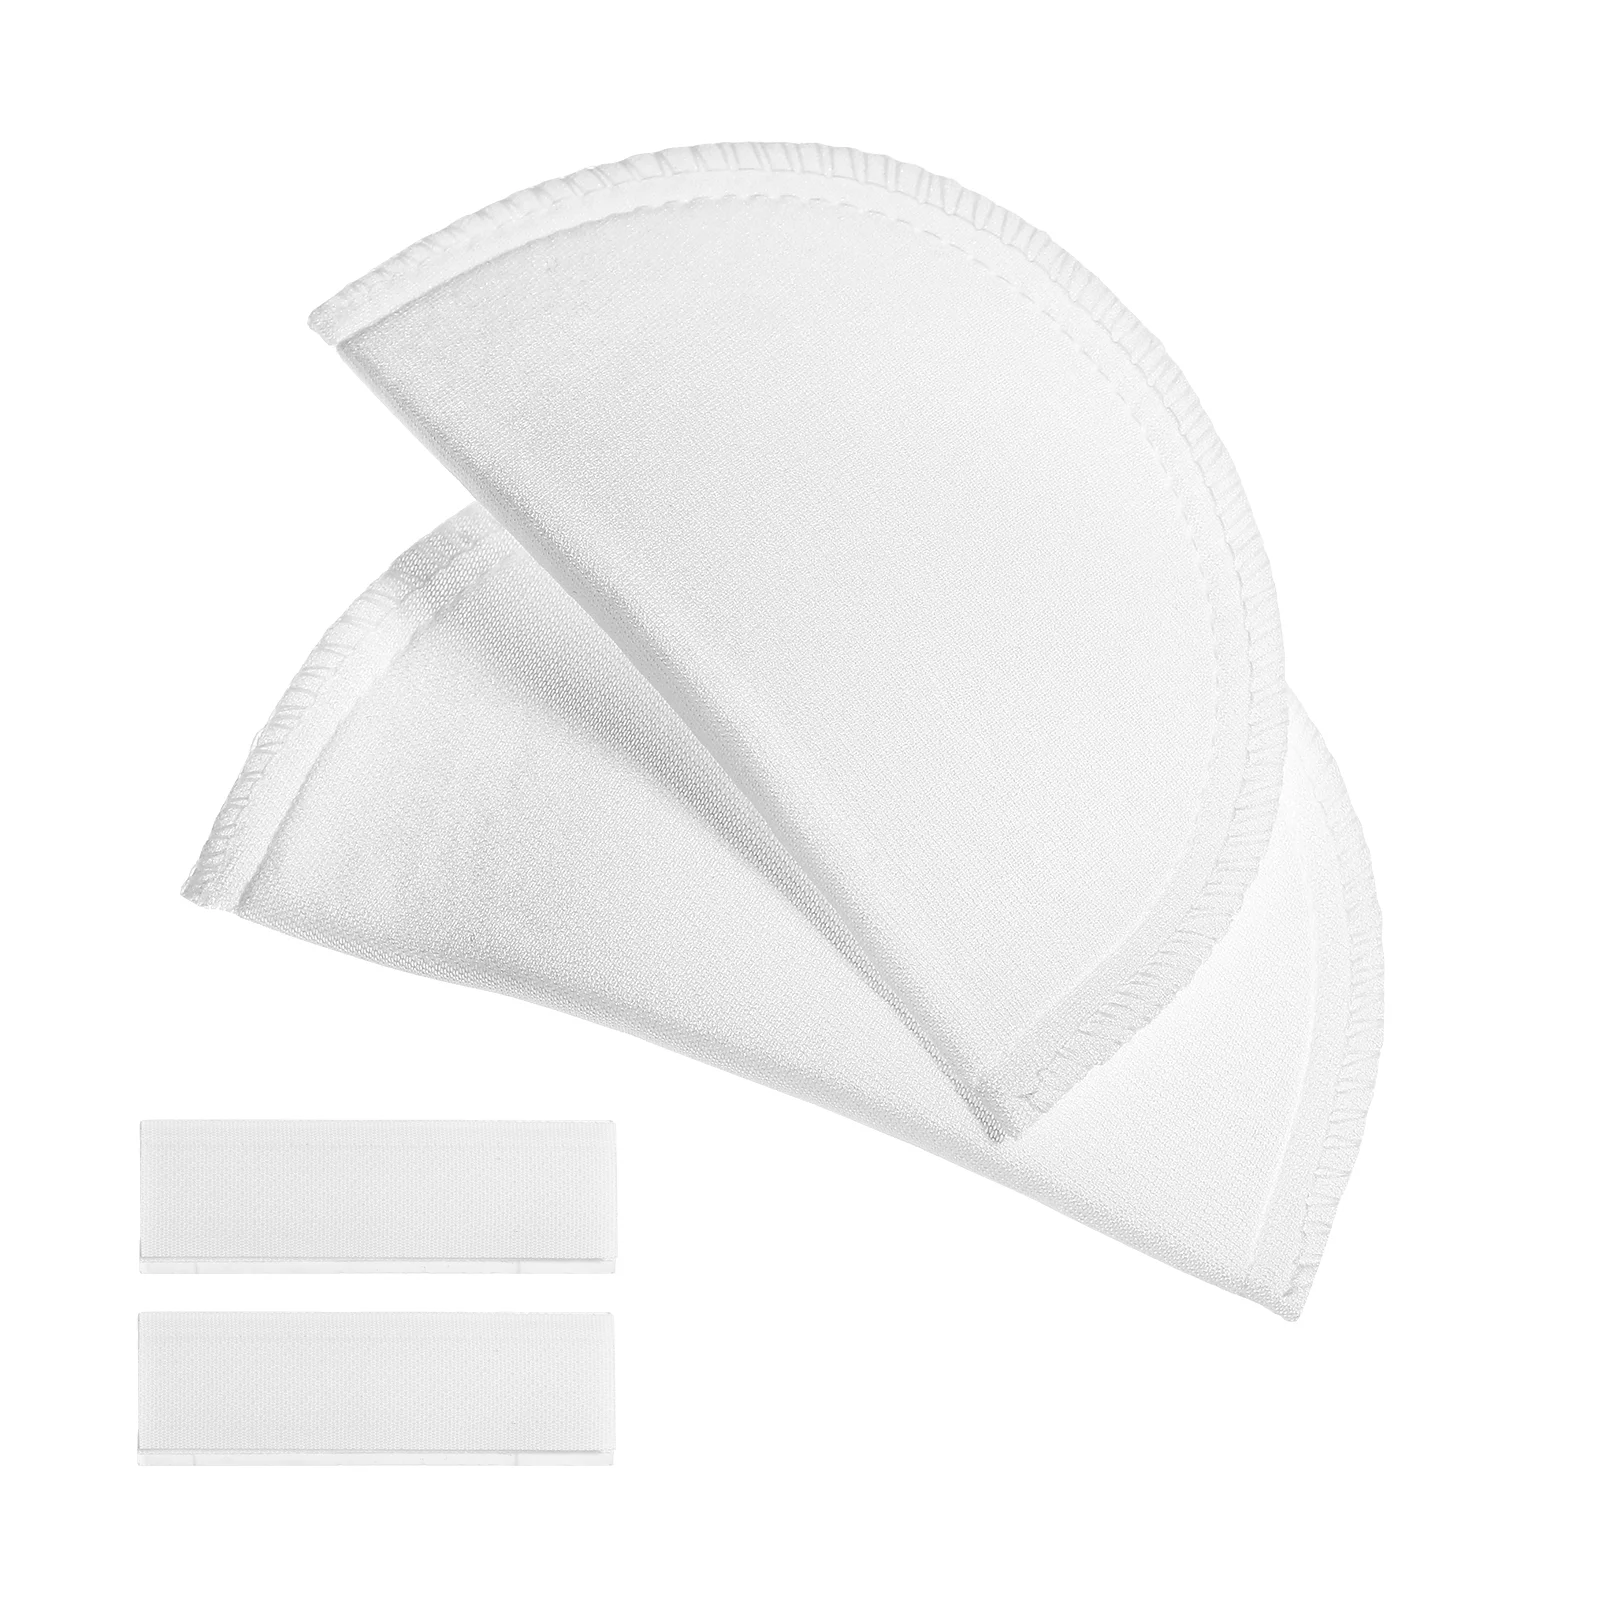 

Shoulder Pads Pad Women Clothing Enhancer Womens Sewing Foam Clothes Adhesive Silicone Suit Covered Push Up Blazer Padding White